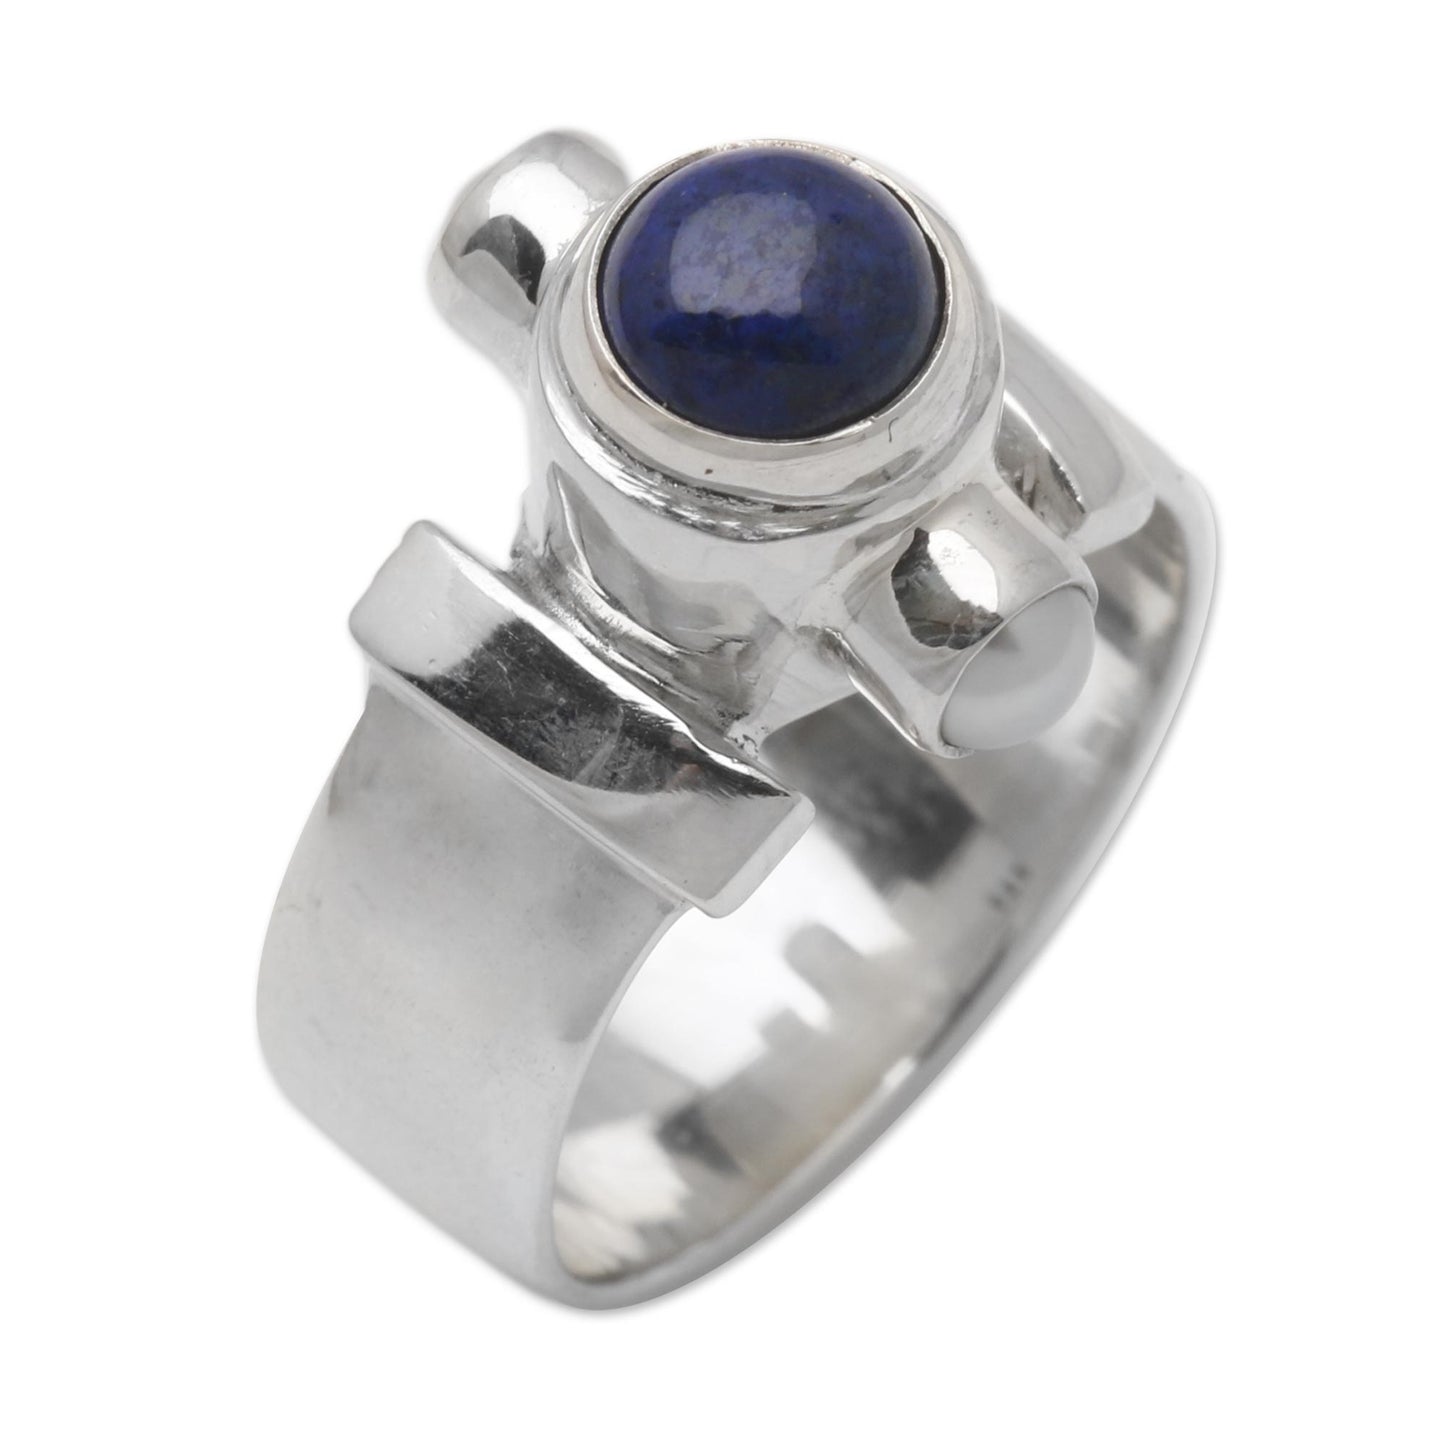 Direction Handcrafted Sterling Silver and Lapis Lazuli Ring